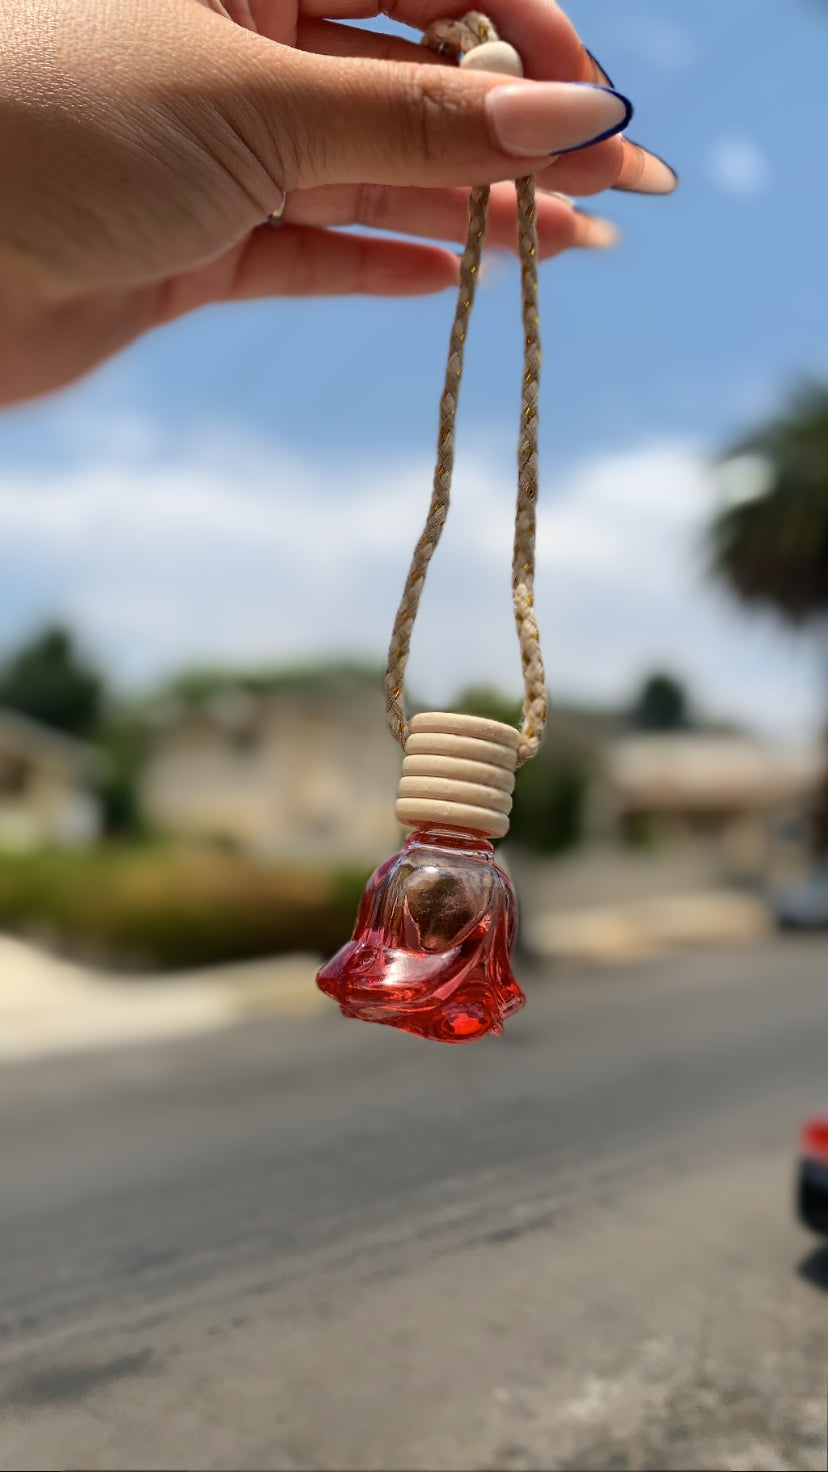 California Scents Hanging Paper Lei Shape Auto Air Freshener